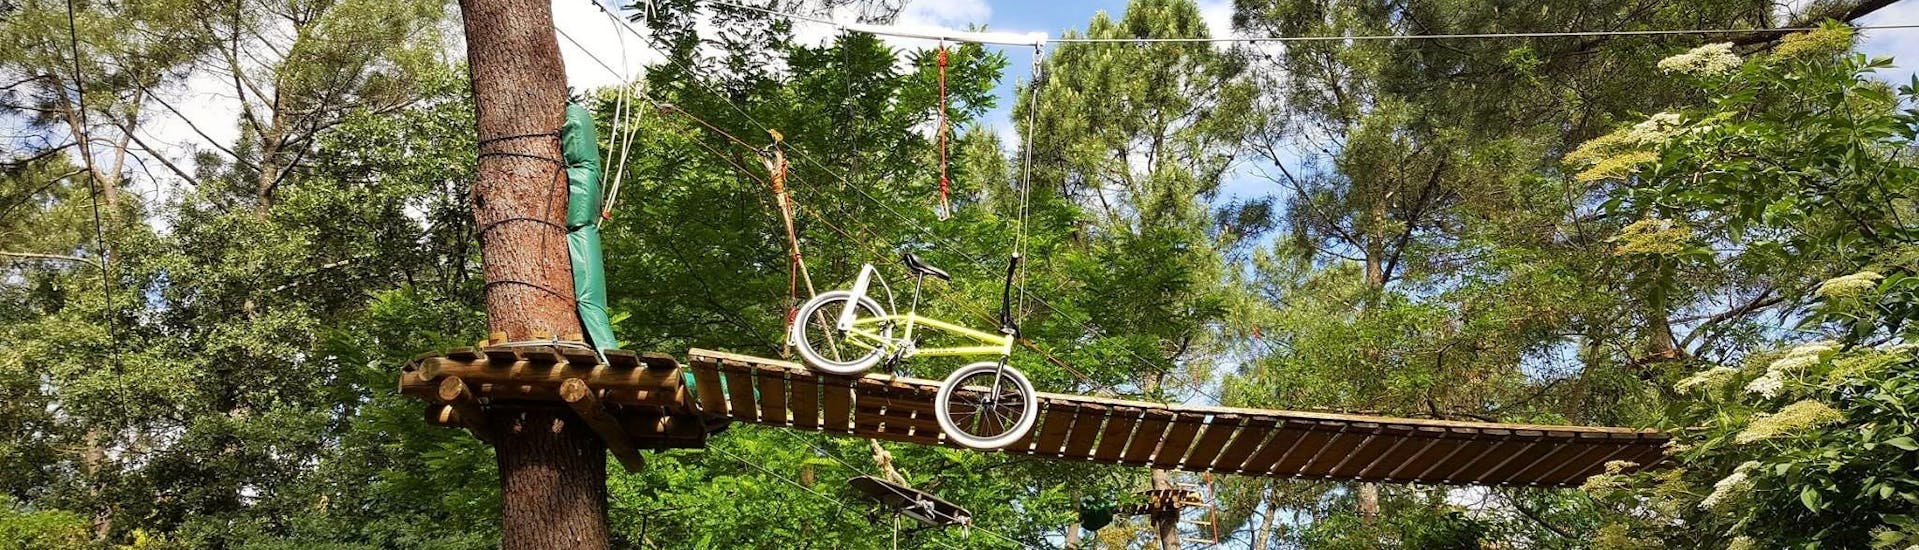 An example of an obstacle in the trees with a bicycle in the Accroche toi aux branches adventure park in the Ardèche gorges.